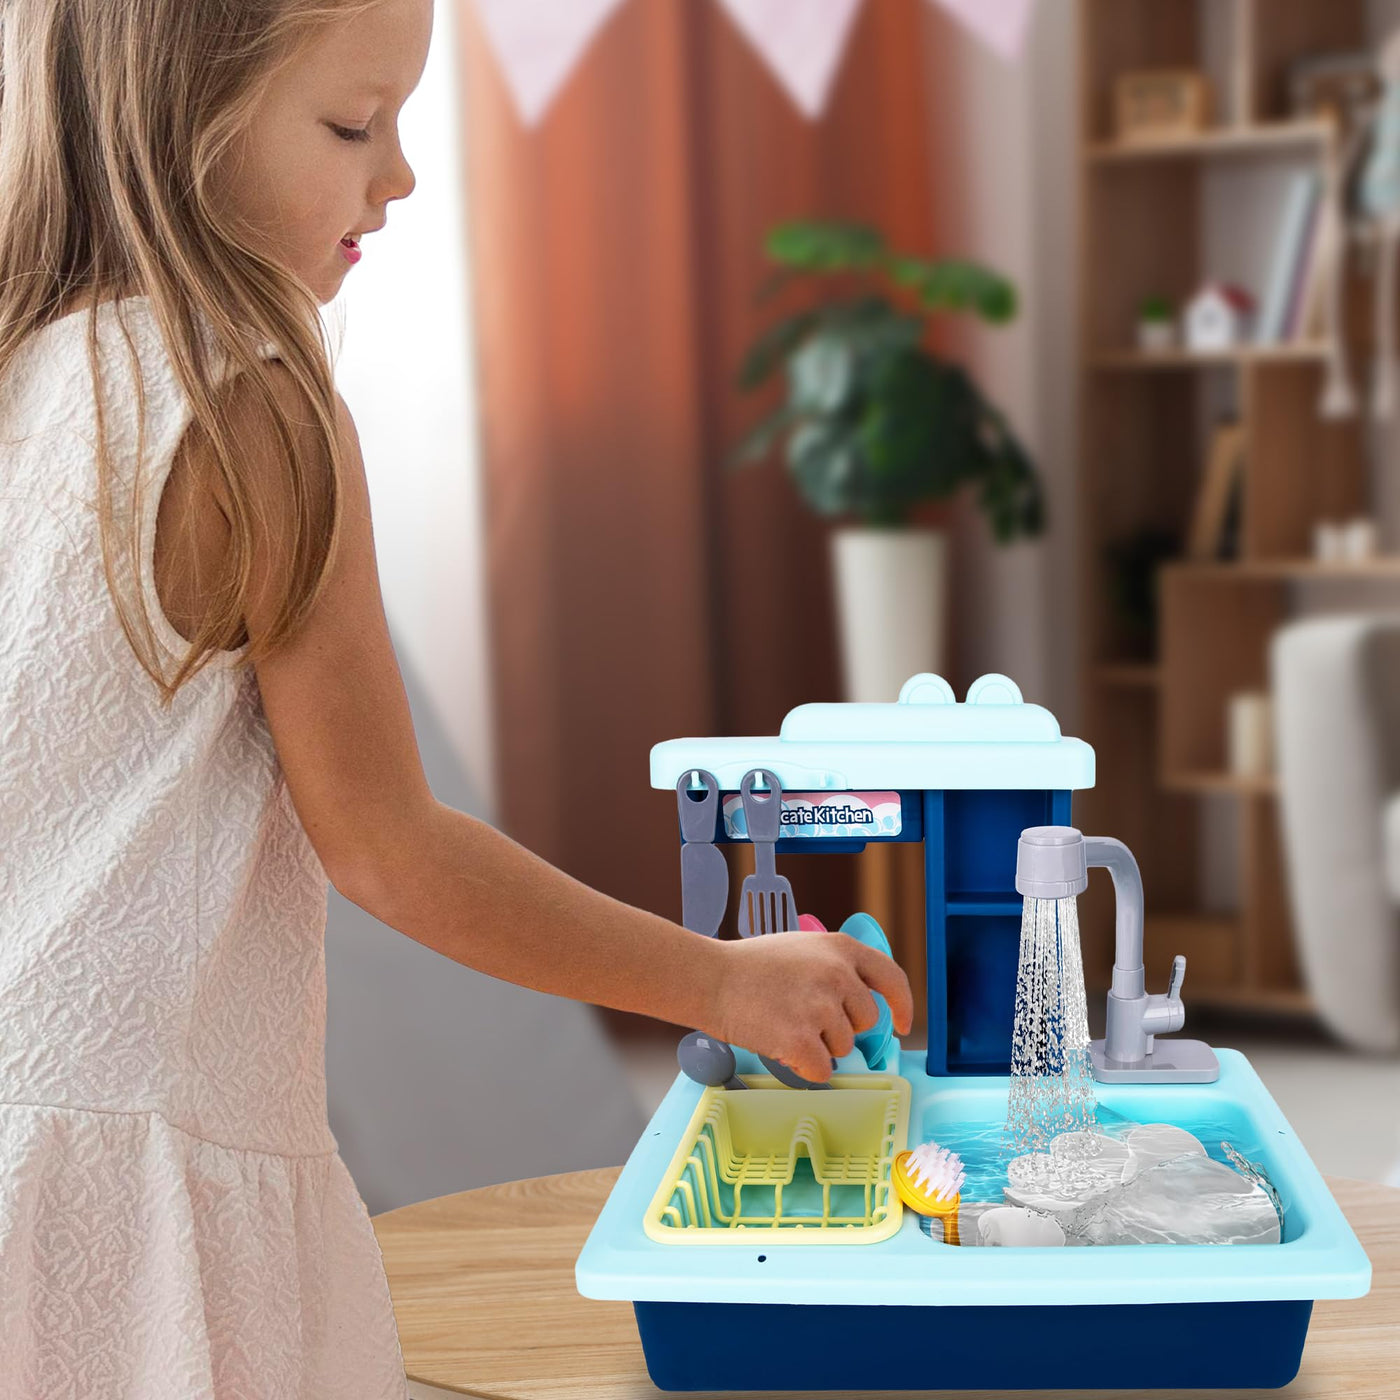 Sink Toy with Running Water and Color Changing Dishes - 22 Piece Kids Kitchen Play Set - Pumps Real Water - Play Kitchen Sink with Drying Rack, Dishes, Toy Detergent Bottle - Ages 3 4 5